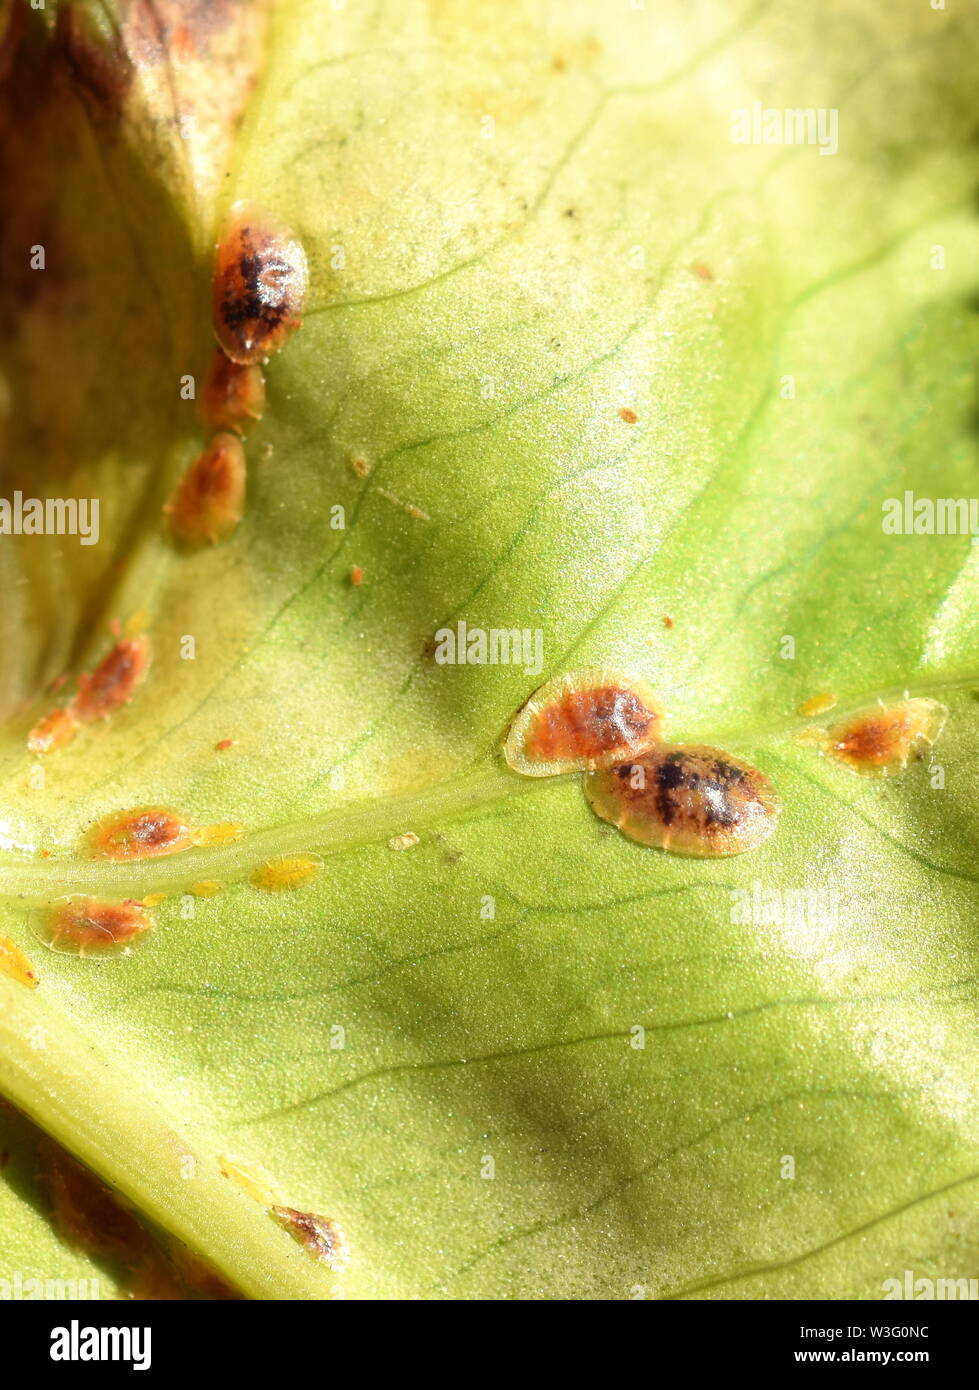 Leaf heavily infested by scale insects coccoidea Stock Photo